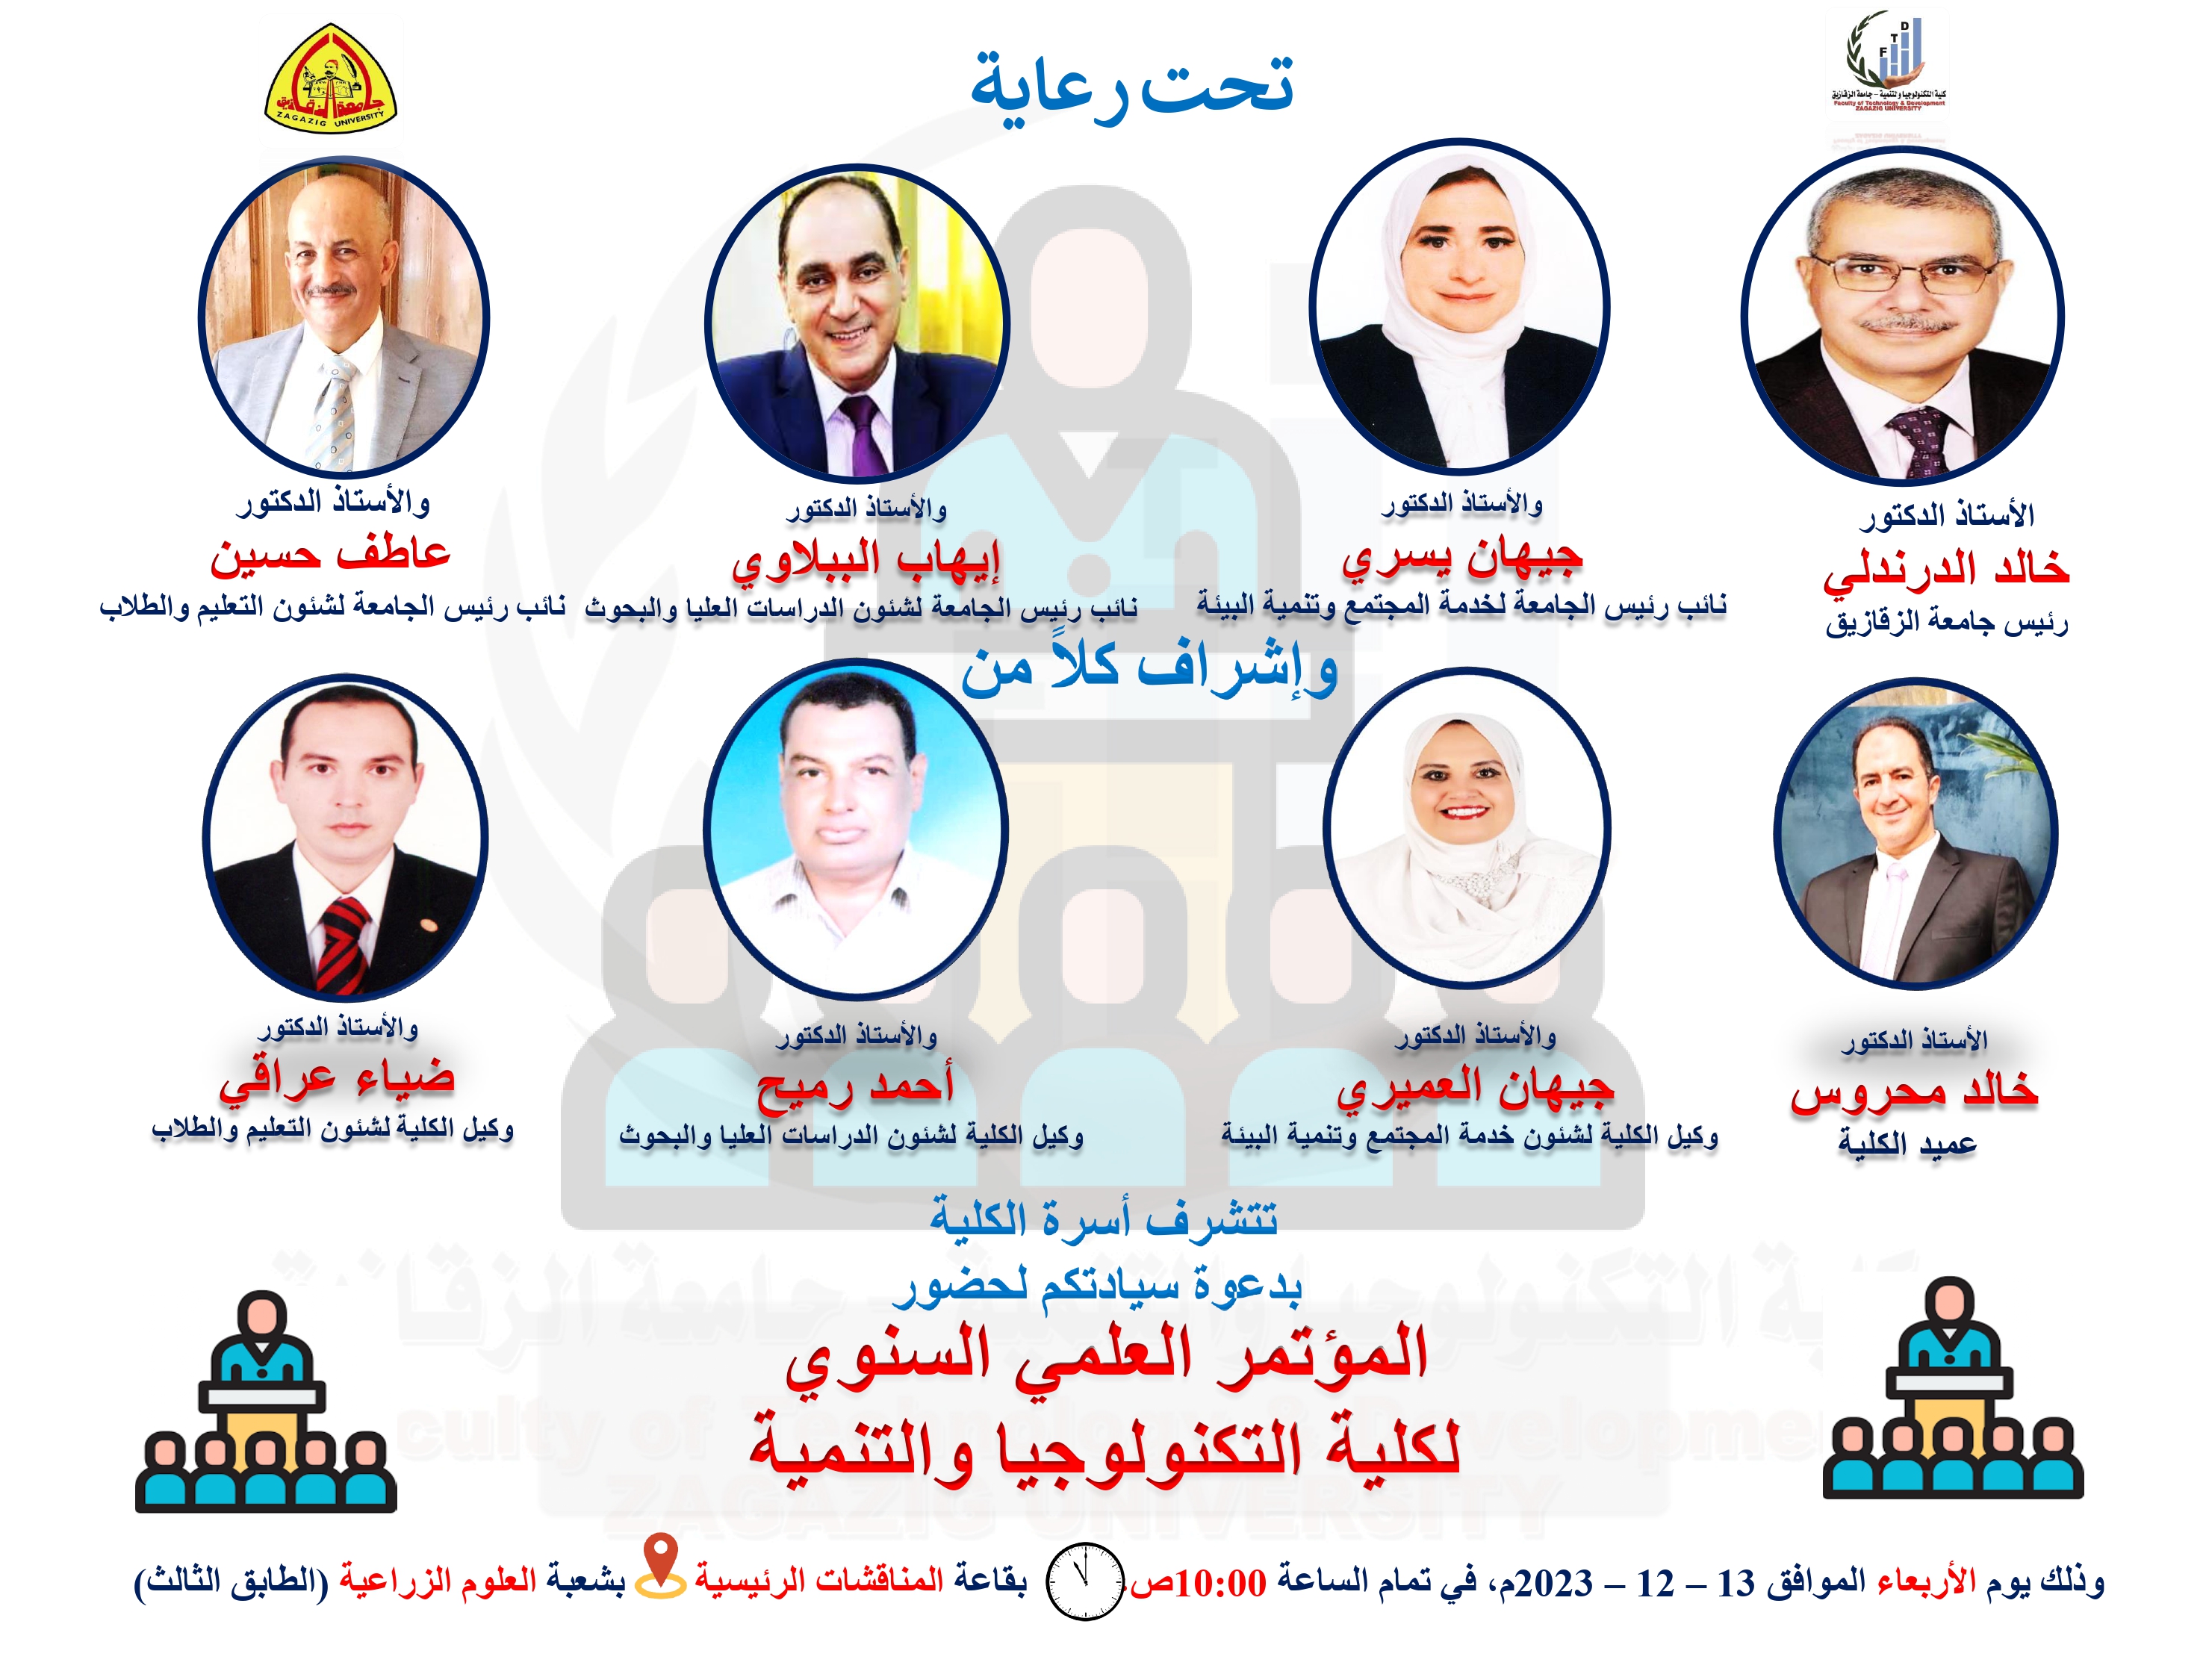 The annual scientific conference of the Faculty of Technology and Development, Zagazig University 2023